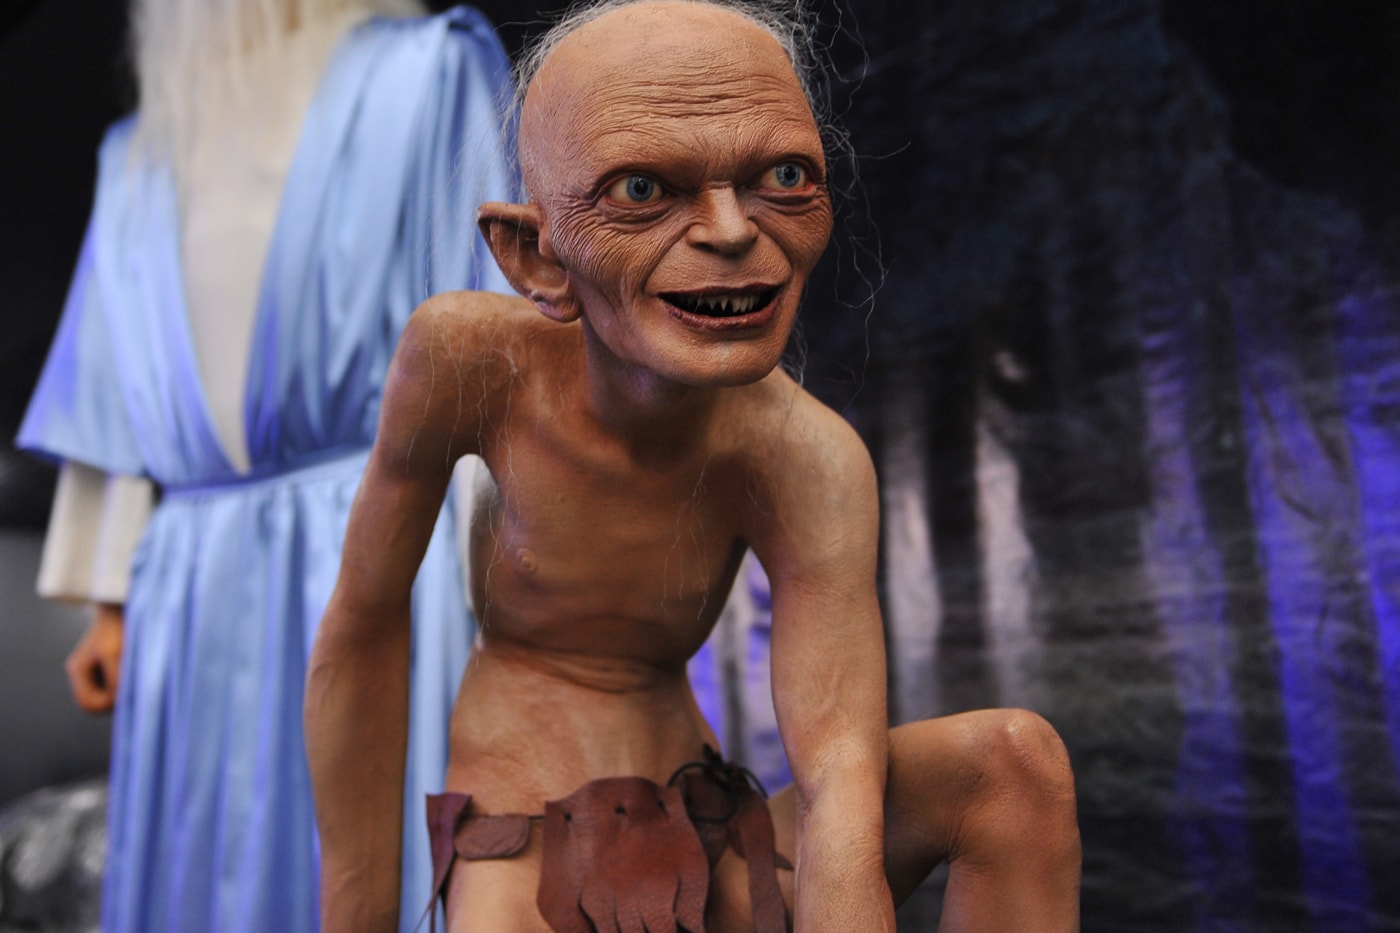 Lord of the Rings: Gollum Release Date Set for May, Except Switch